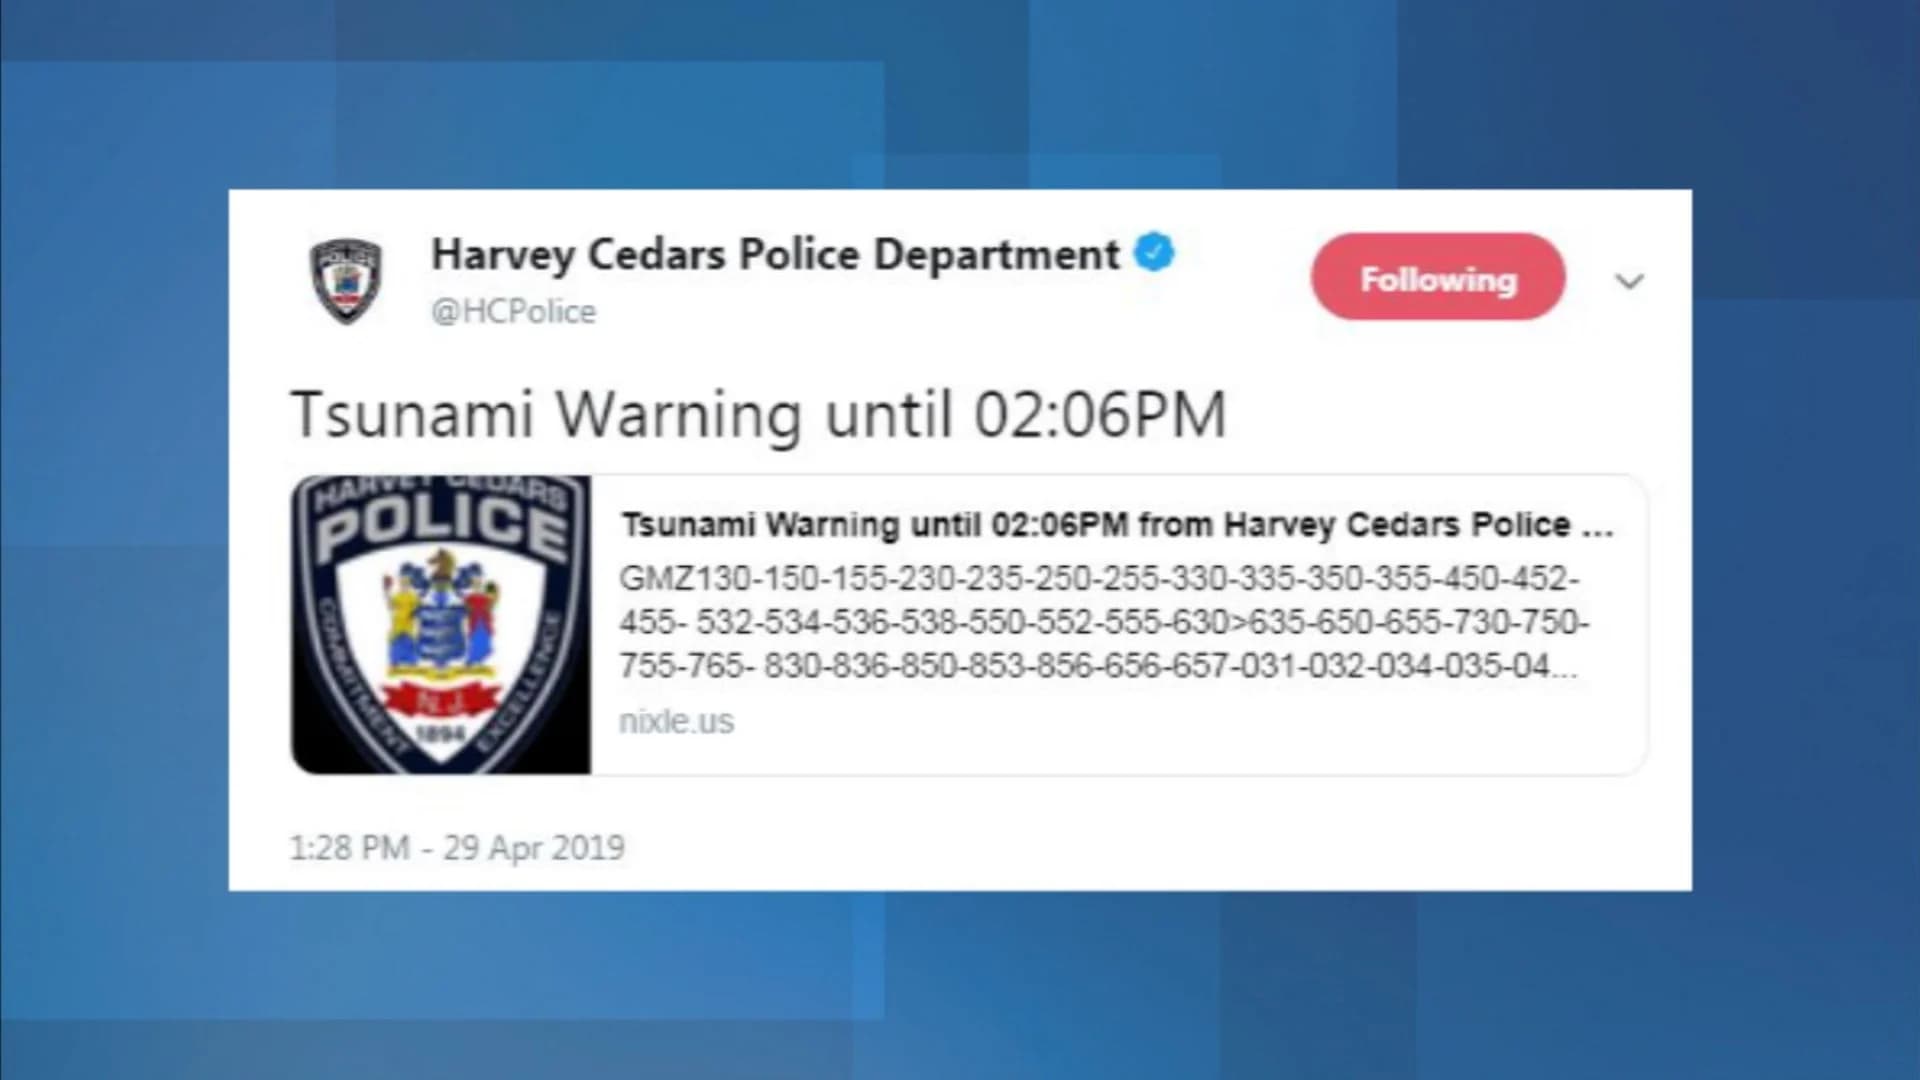 No cause for alarm: Tsunami warning alert mistakenly sent out by police